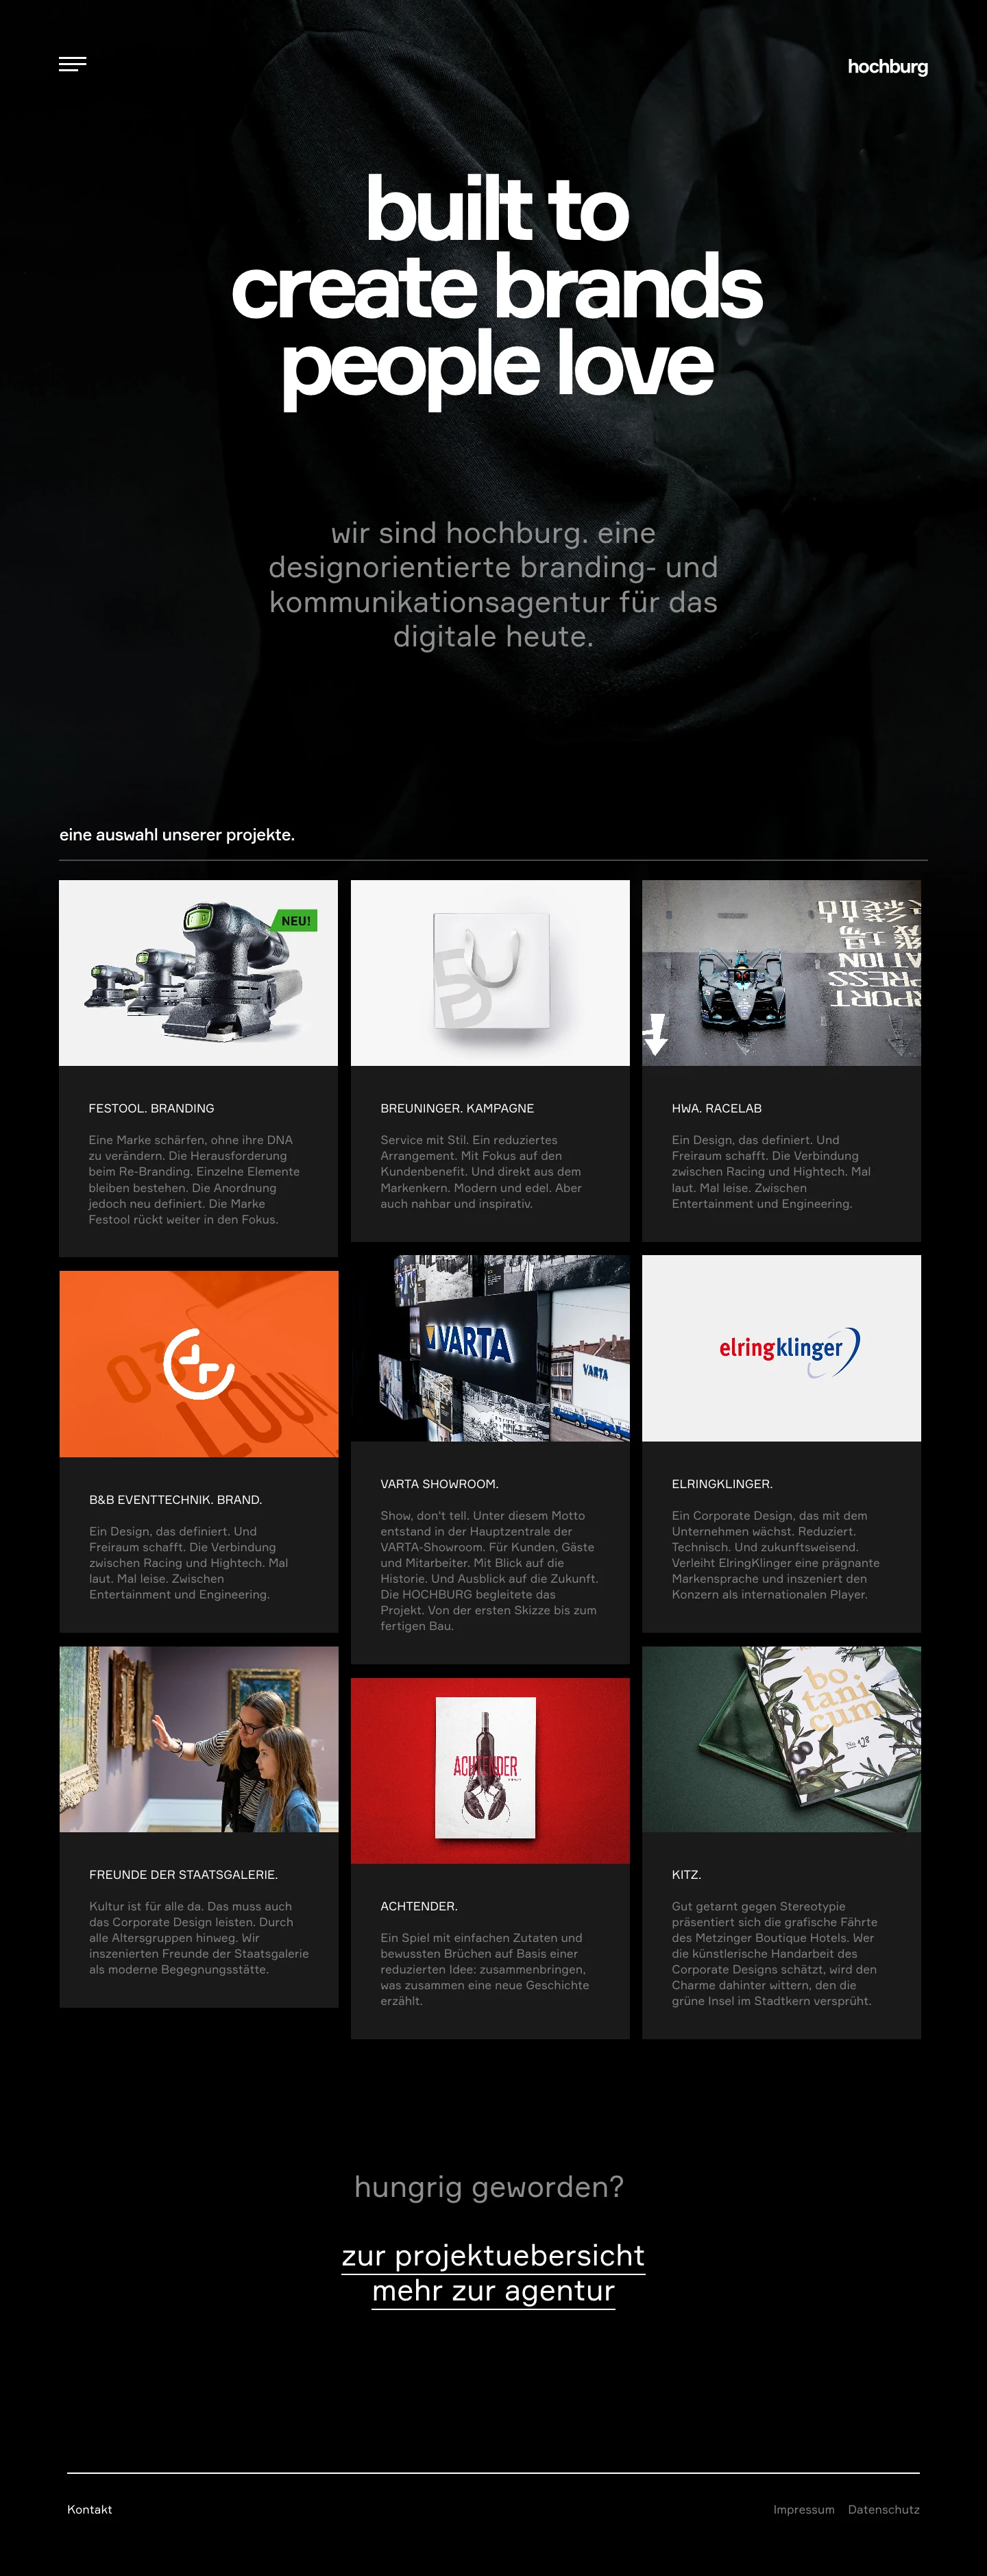 Hochburg Landing Page Example: Built to create brands people love.